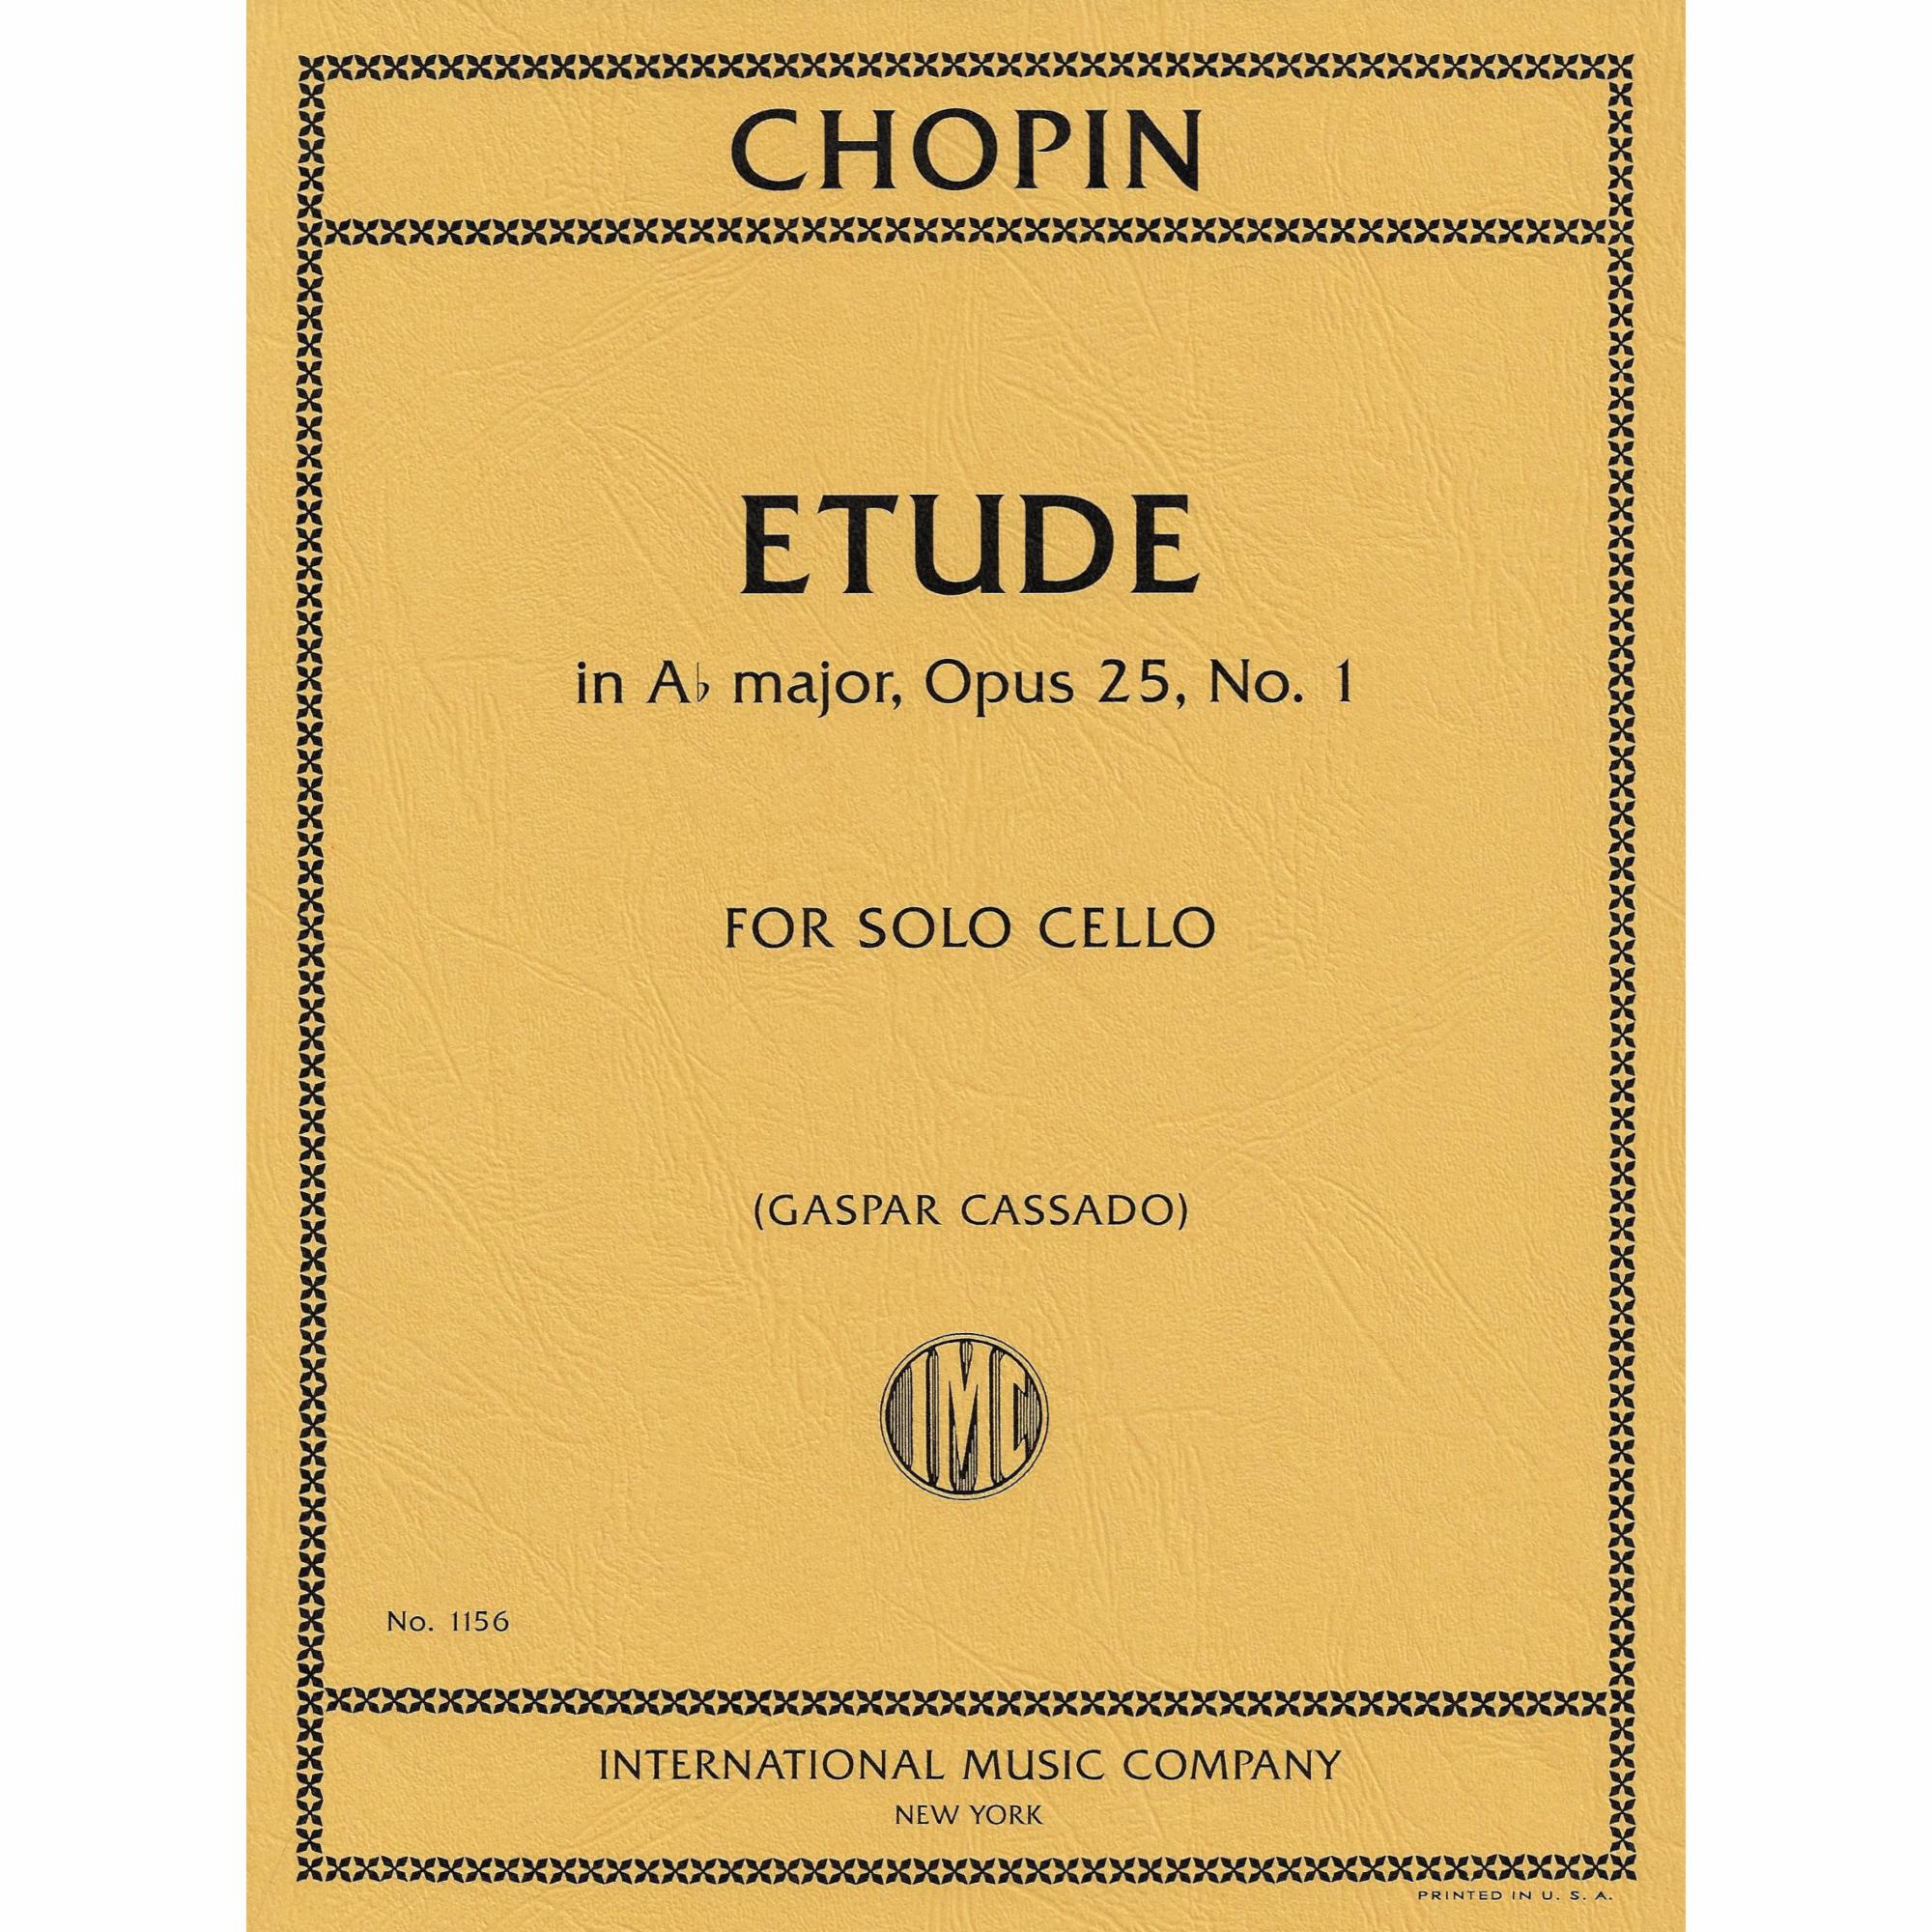 Chopin -- Etude in A-flat Major, Op. 25, No. 1 for Solo Cello